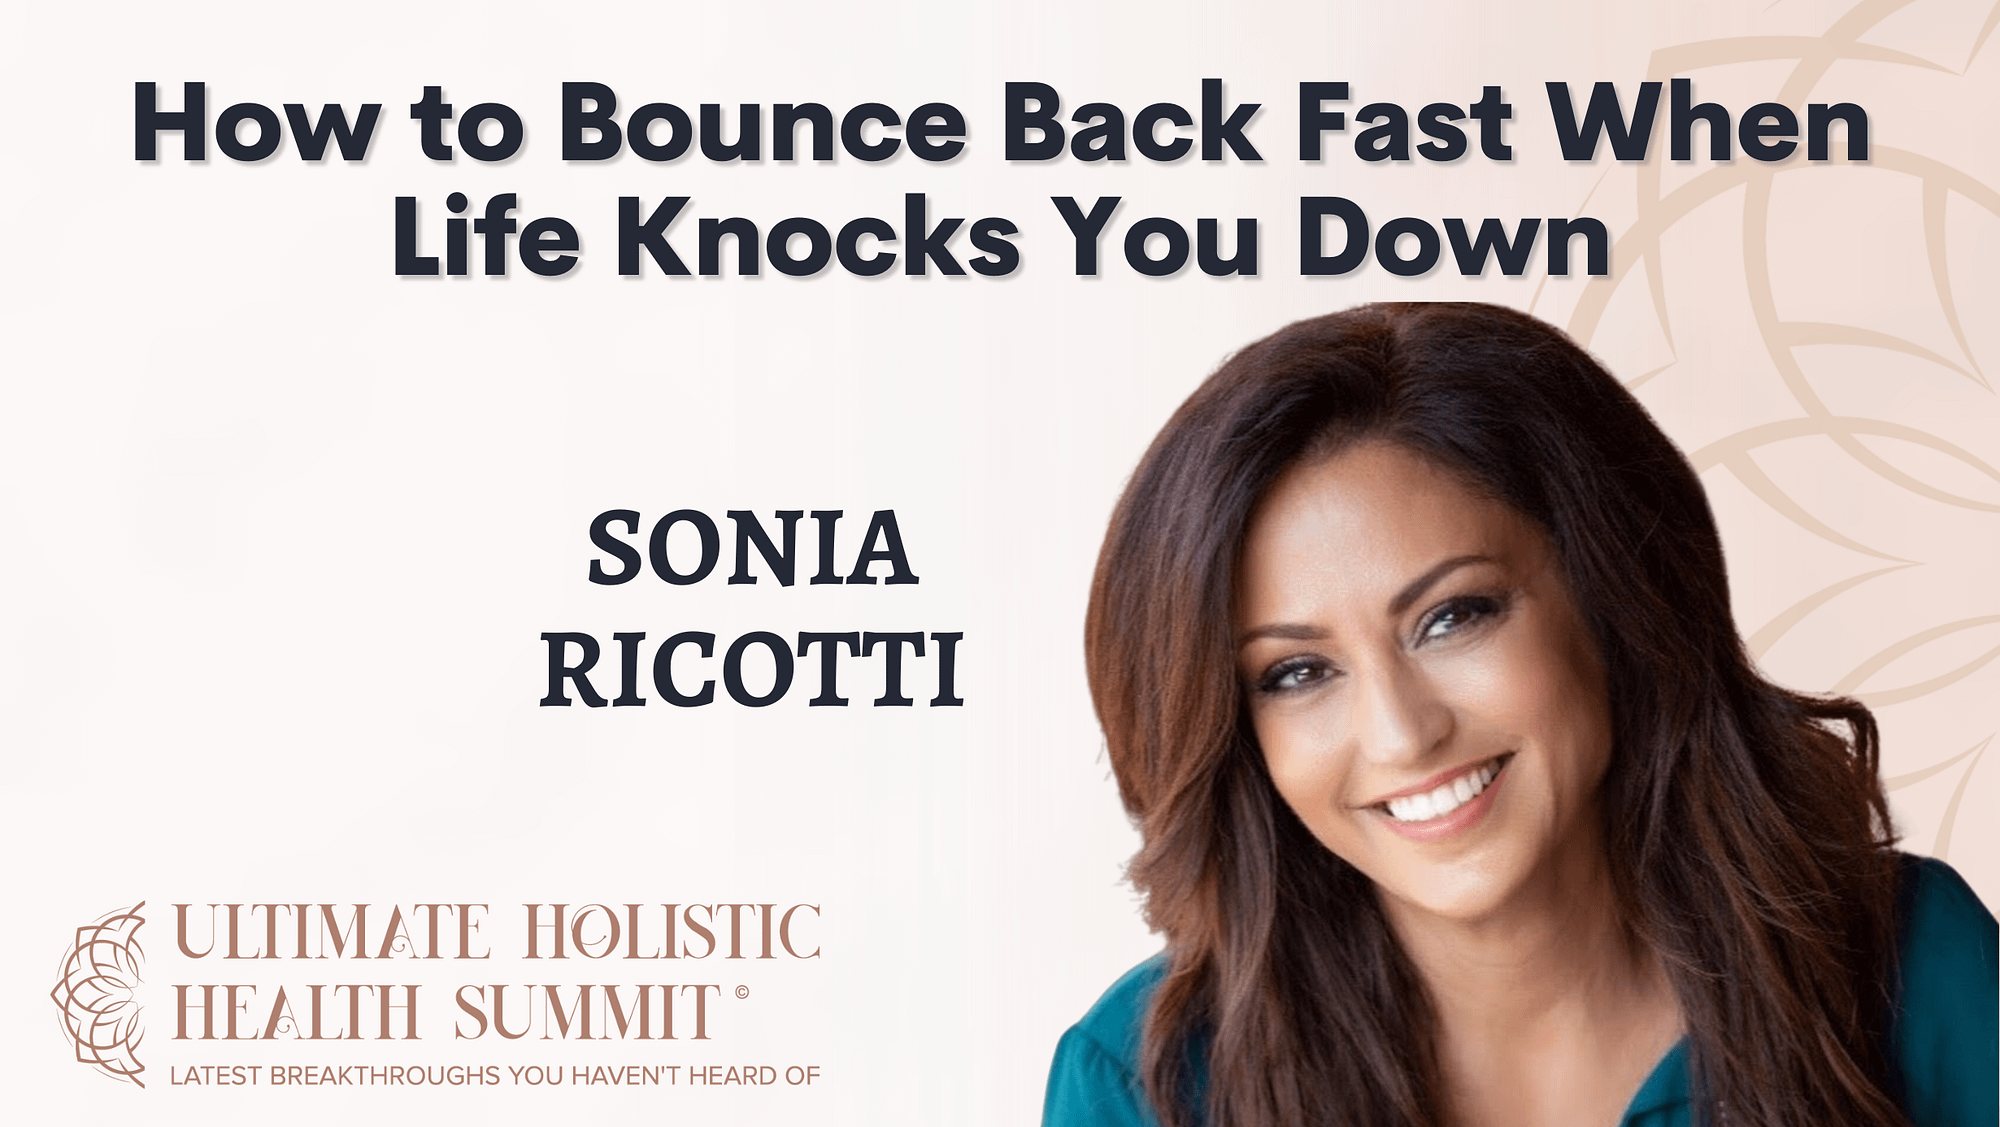 How to Bounce Back Fast When Life Knocks You Down